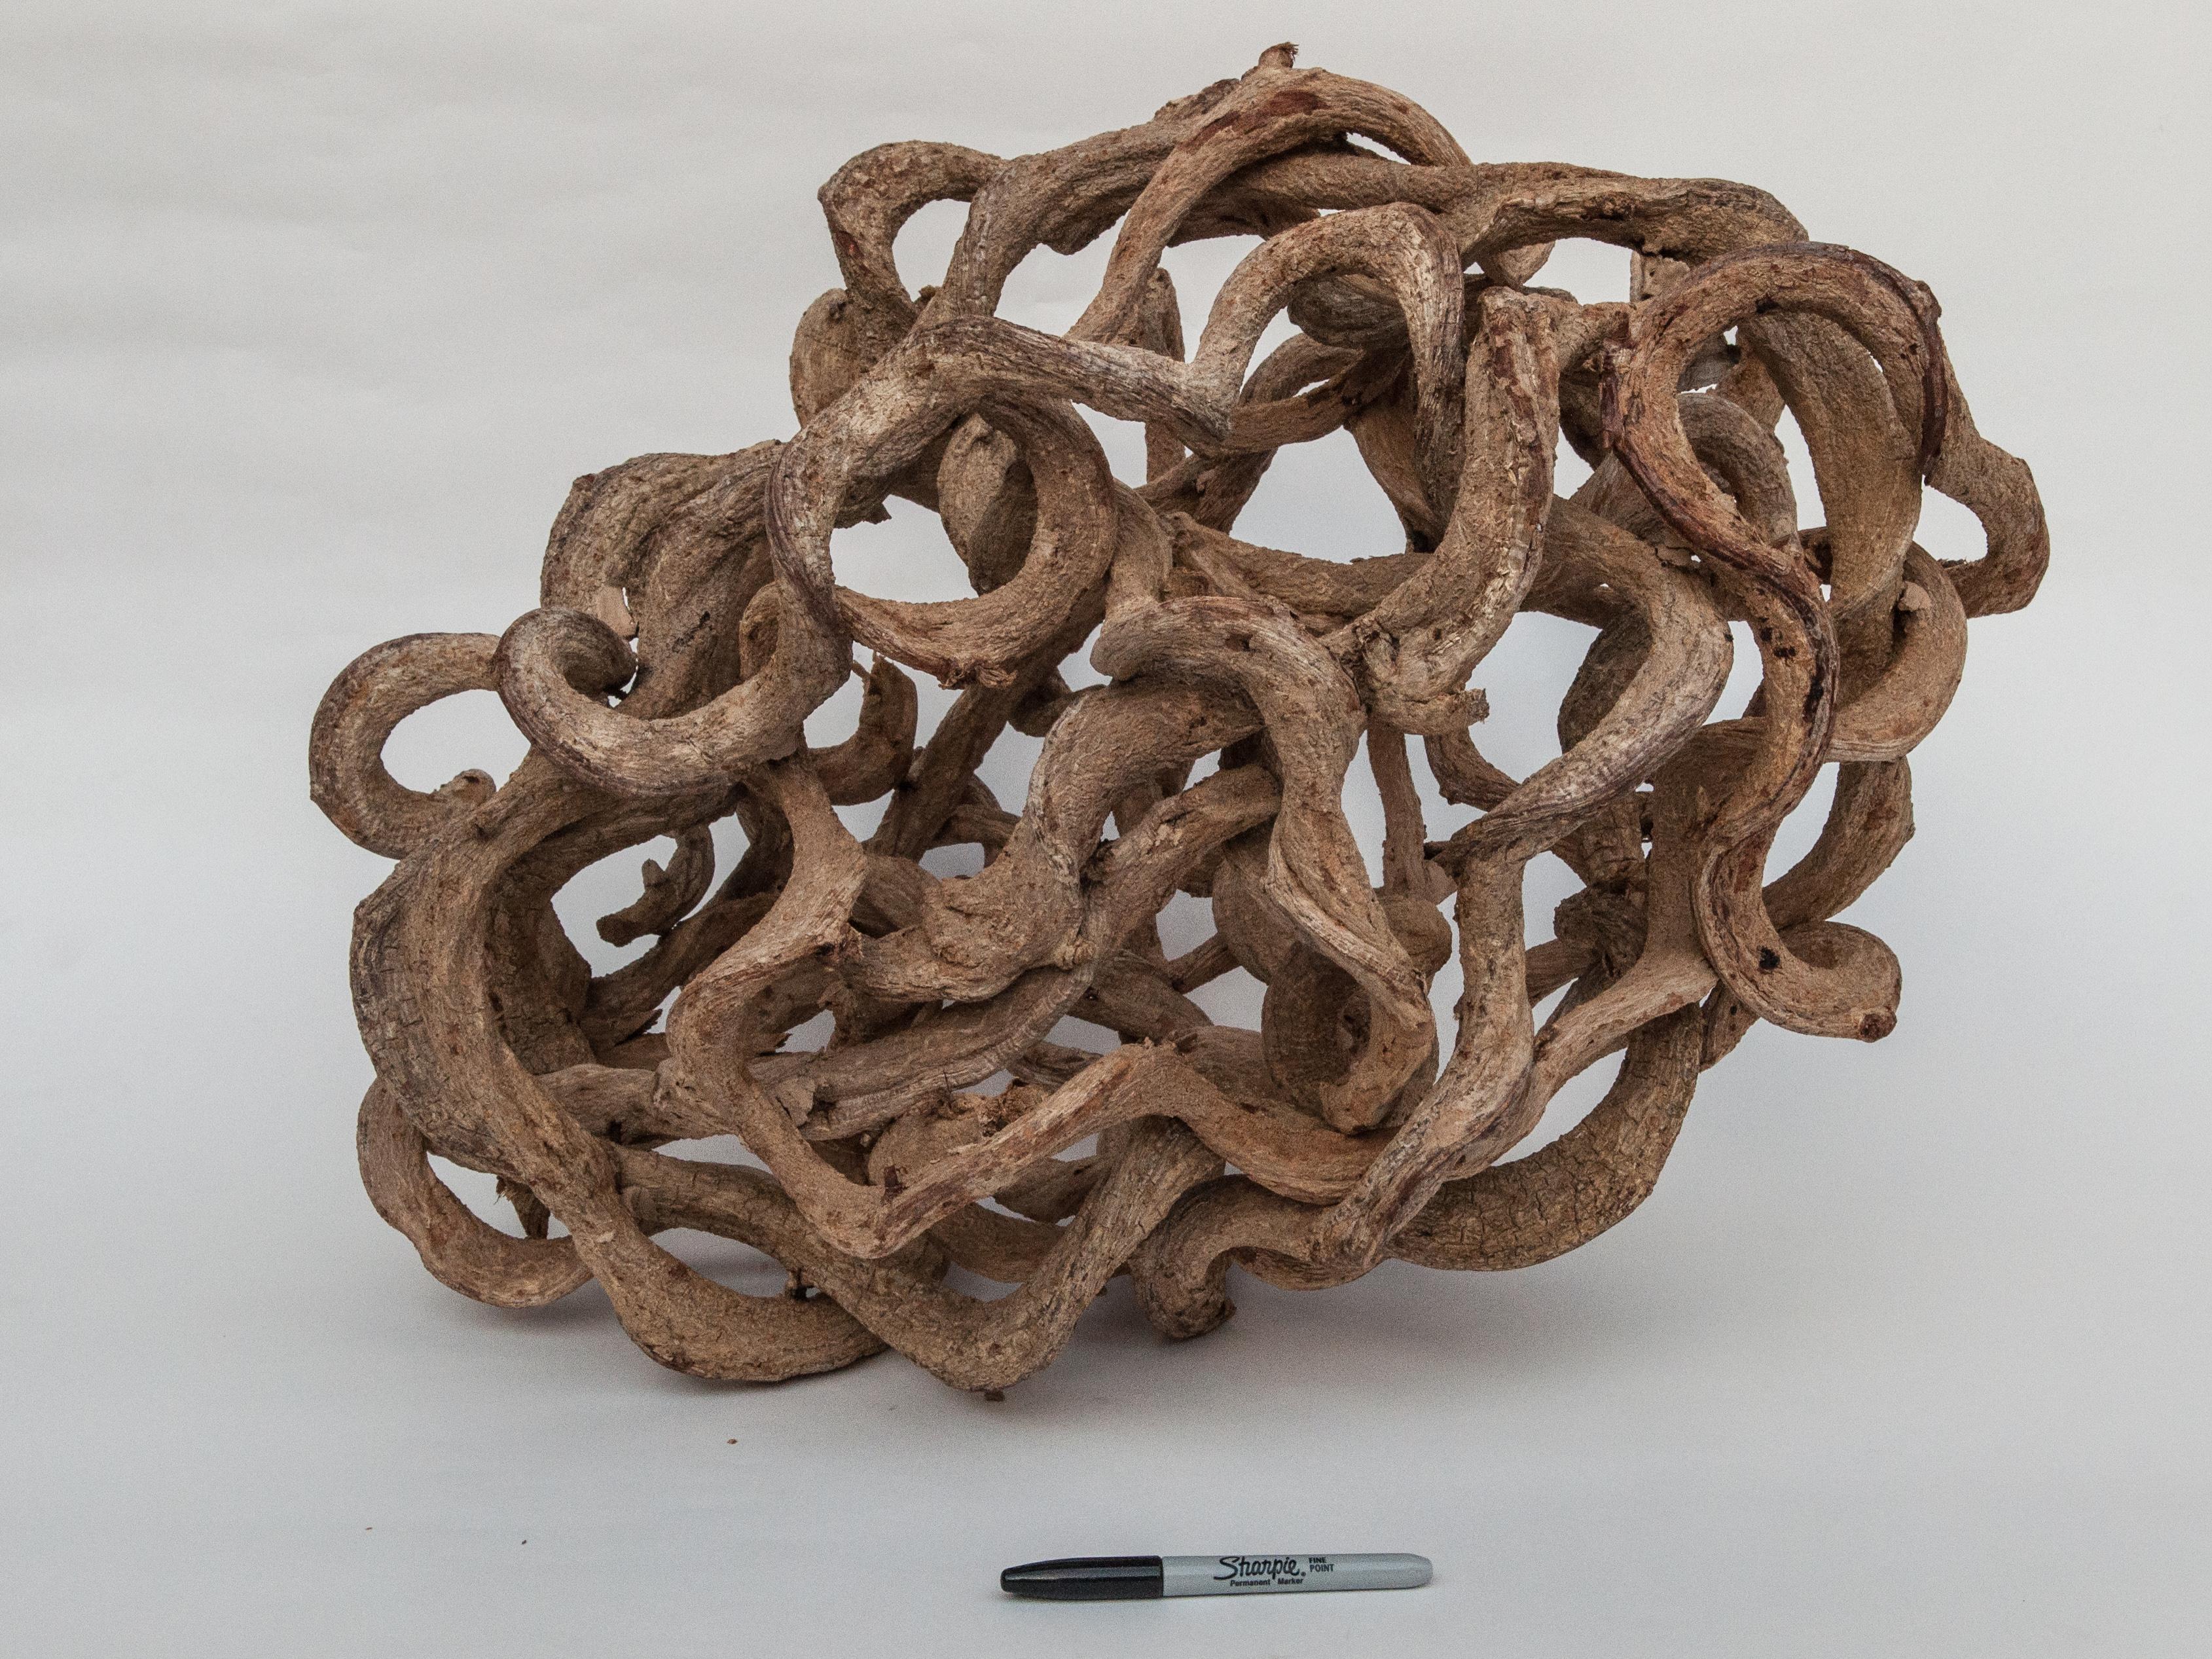 Liana Vine organic sculpture in ovoid shape from Thailand.
Offered by Bruce Hughes.
The liana vines for this piece were gathered from the forests of eastern Thailand. They were cleaned and bleached and wound together into an ovoid shape.
This